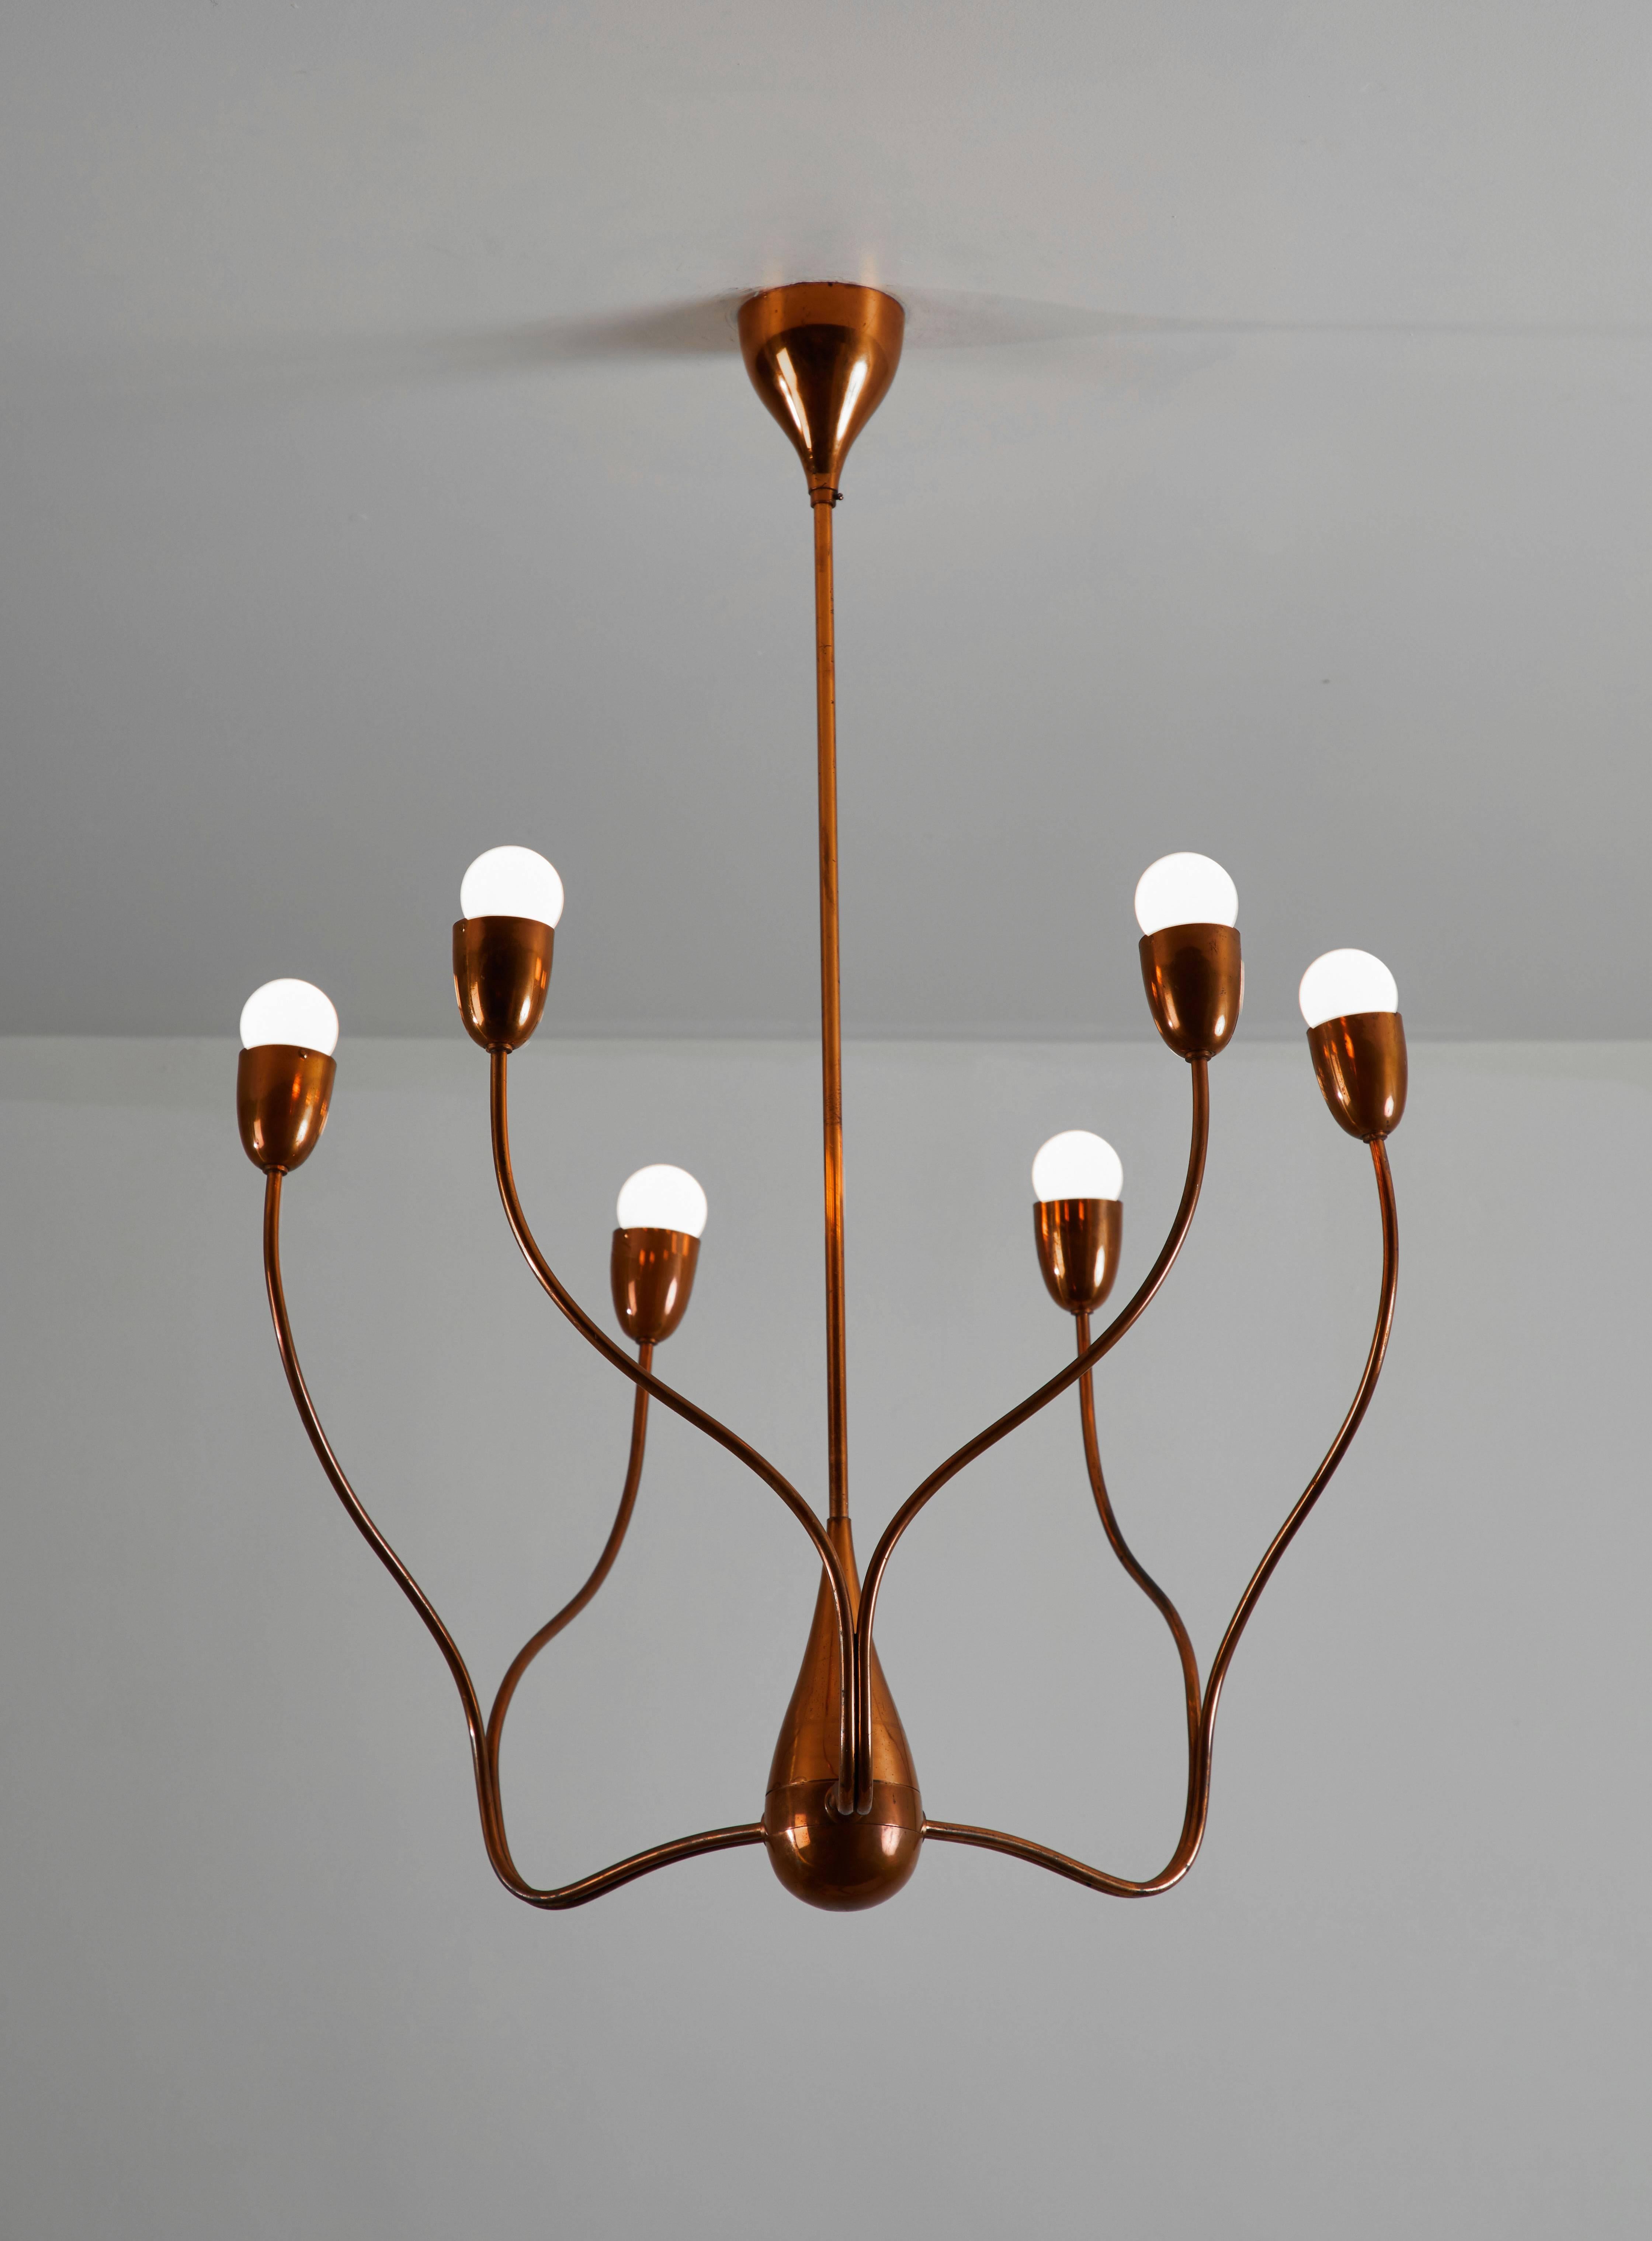 Elegant six-arm copper chandelier attributed to Franco Buzzi. Designed in Italy, circa 1940s. Wired for US junction boxes. Original canopy. Takes six E27 40w maximum bulbs.
 